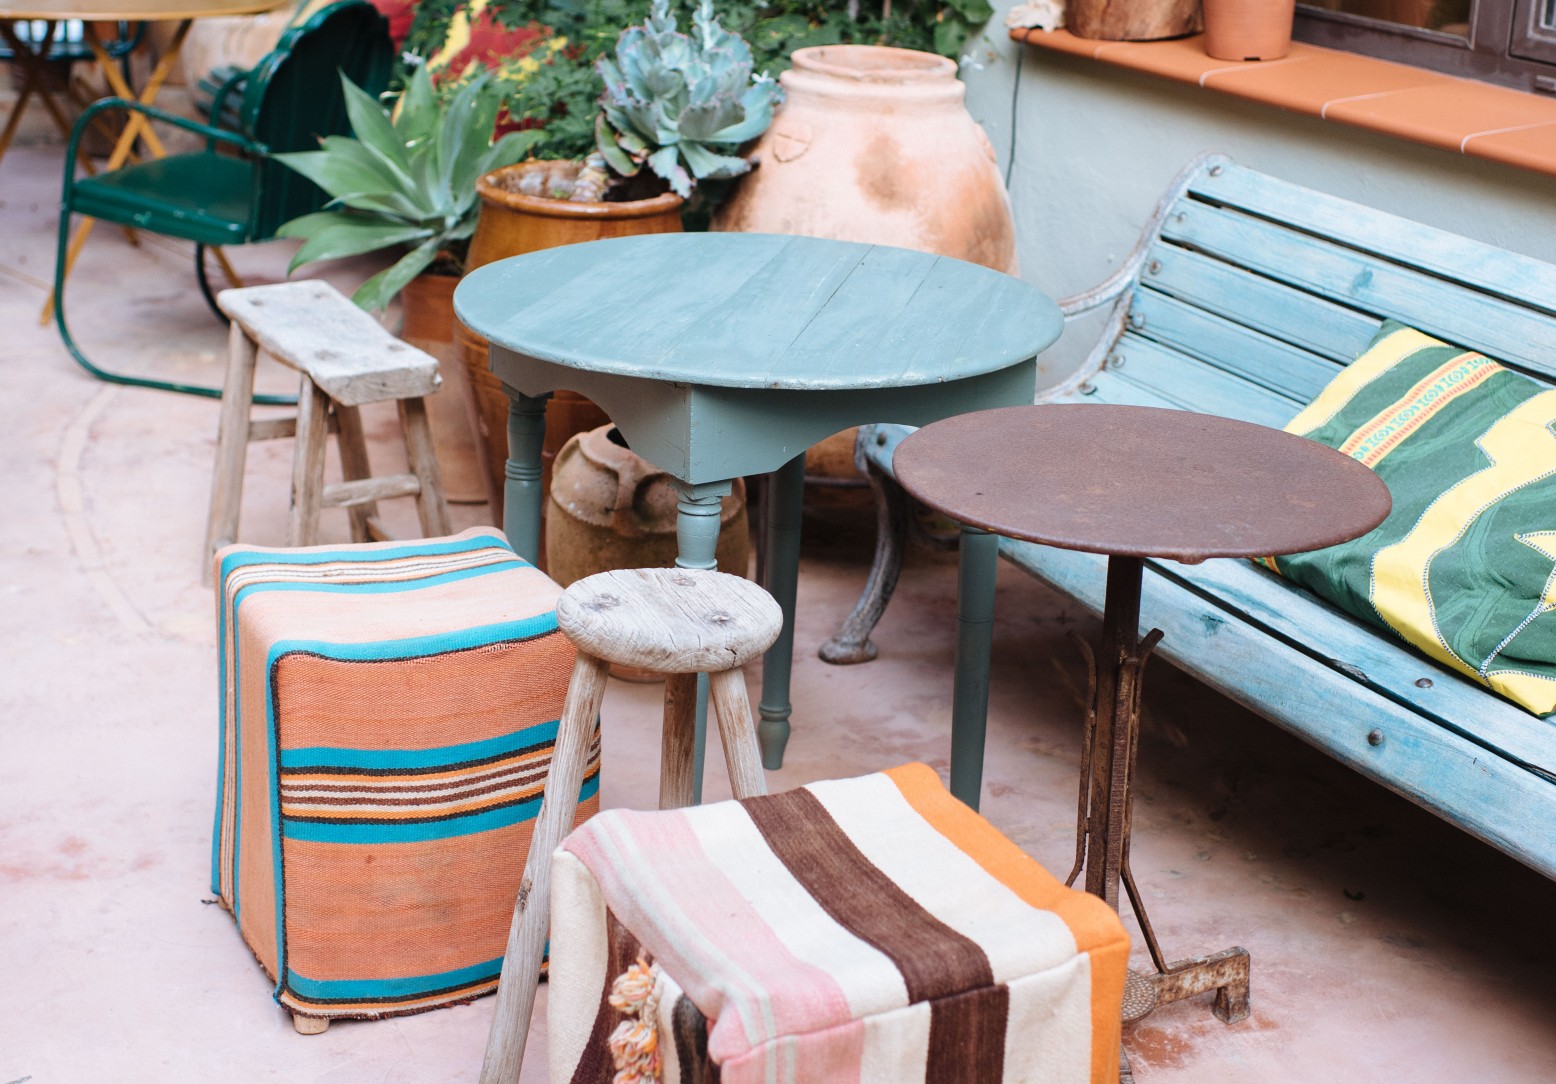 DIY Fabric Covered Stools (Made From A Milk Crate!)